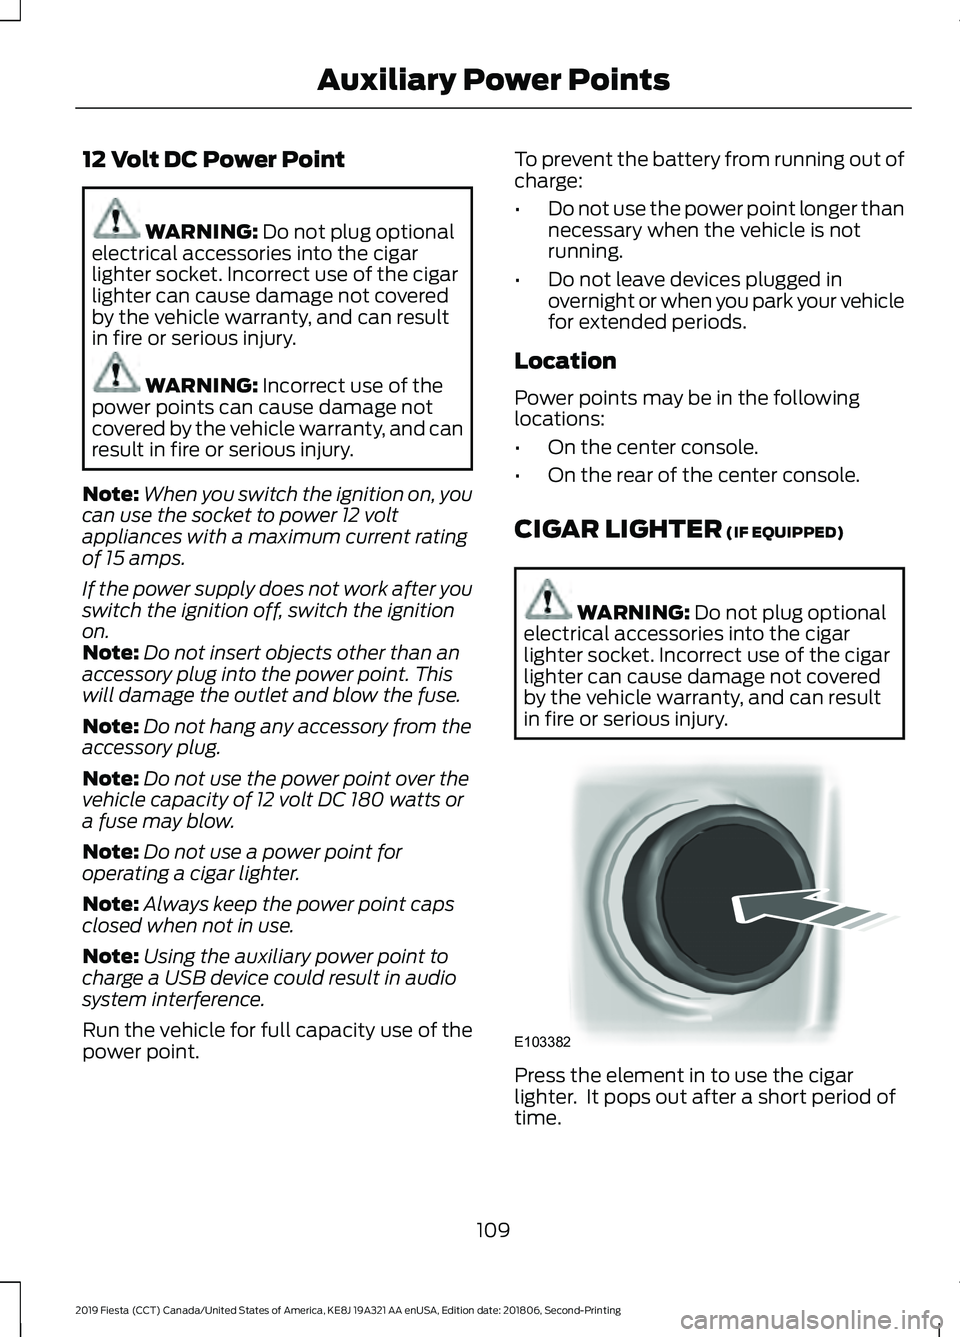 FORD FIESTA 2019  Owners Manual 12 Volt DC Power Point
WARNING: Do not plug optional
electrical accessories into the cigar
lighter socket. Incorrect use of the cigar
lighter can cause damage not covered
by the vehicle warranty, and 